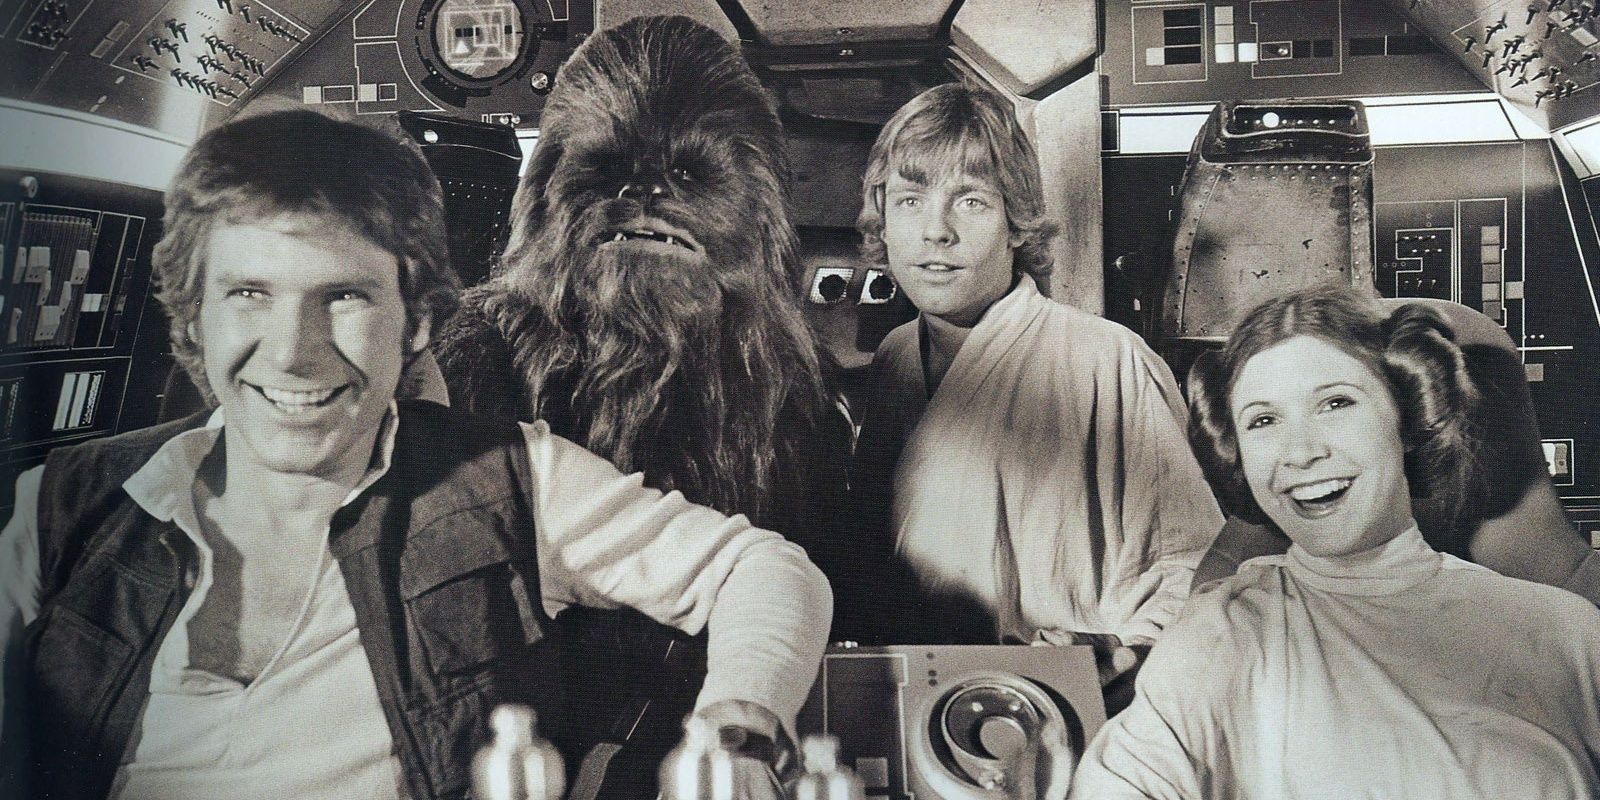 Harrison Ford, Peter Mayhew, Mark Hamill, and Carrie Fisher as Han, Chewie, Luke, and Leia in Star Wars A New Hope